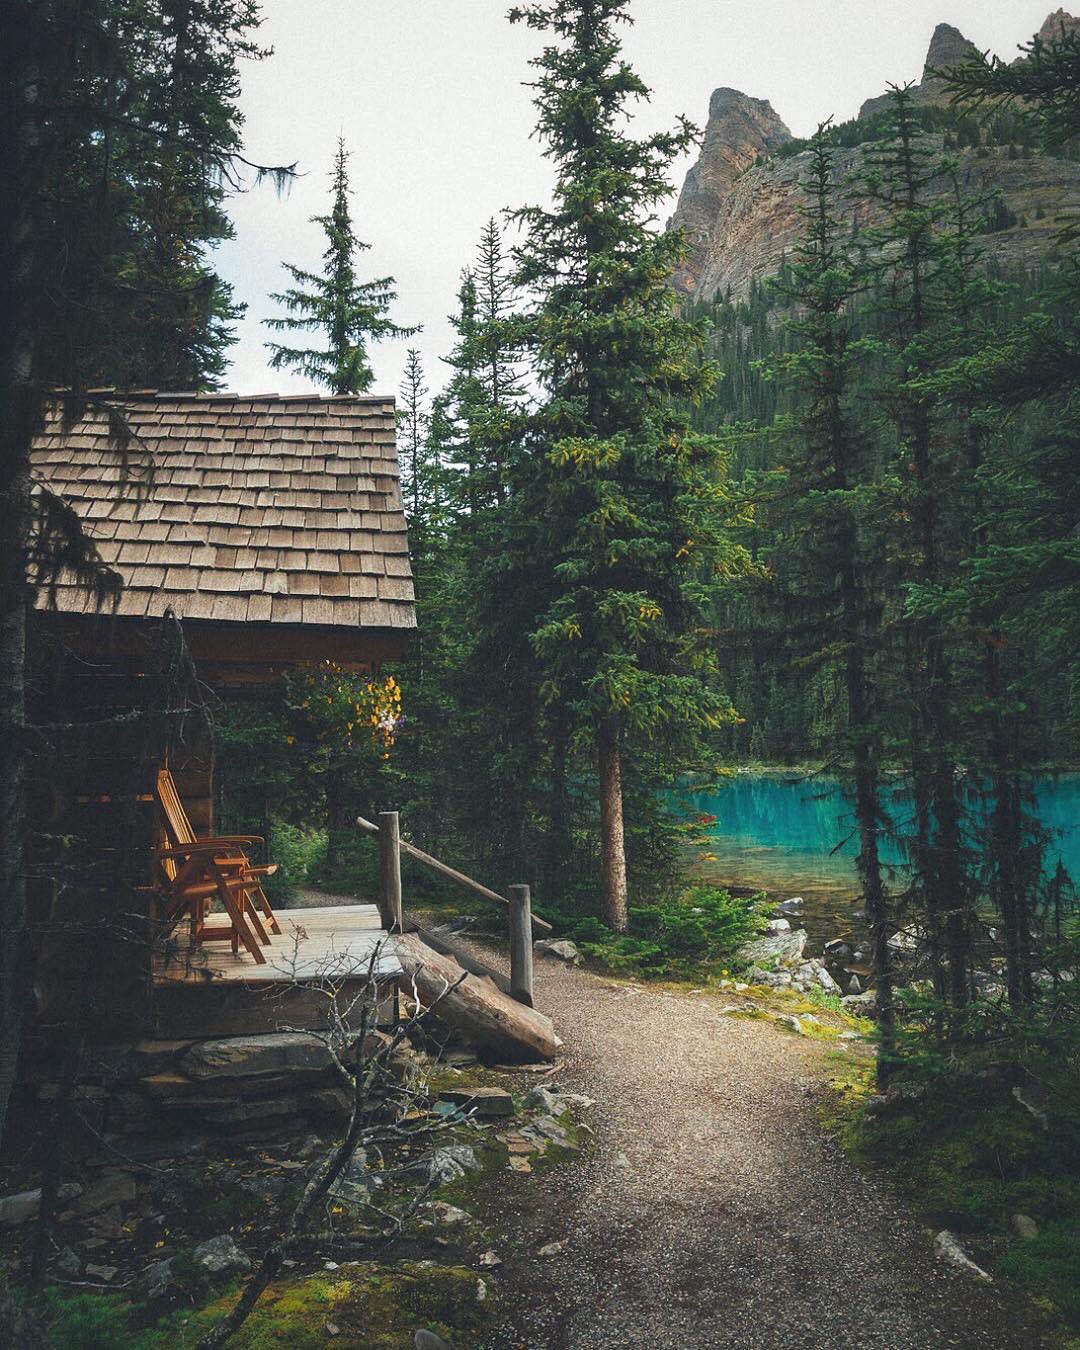 This place in Banff, Alberta, Canada